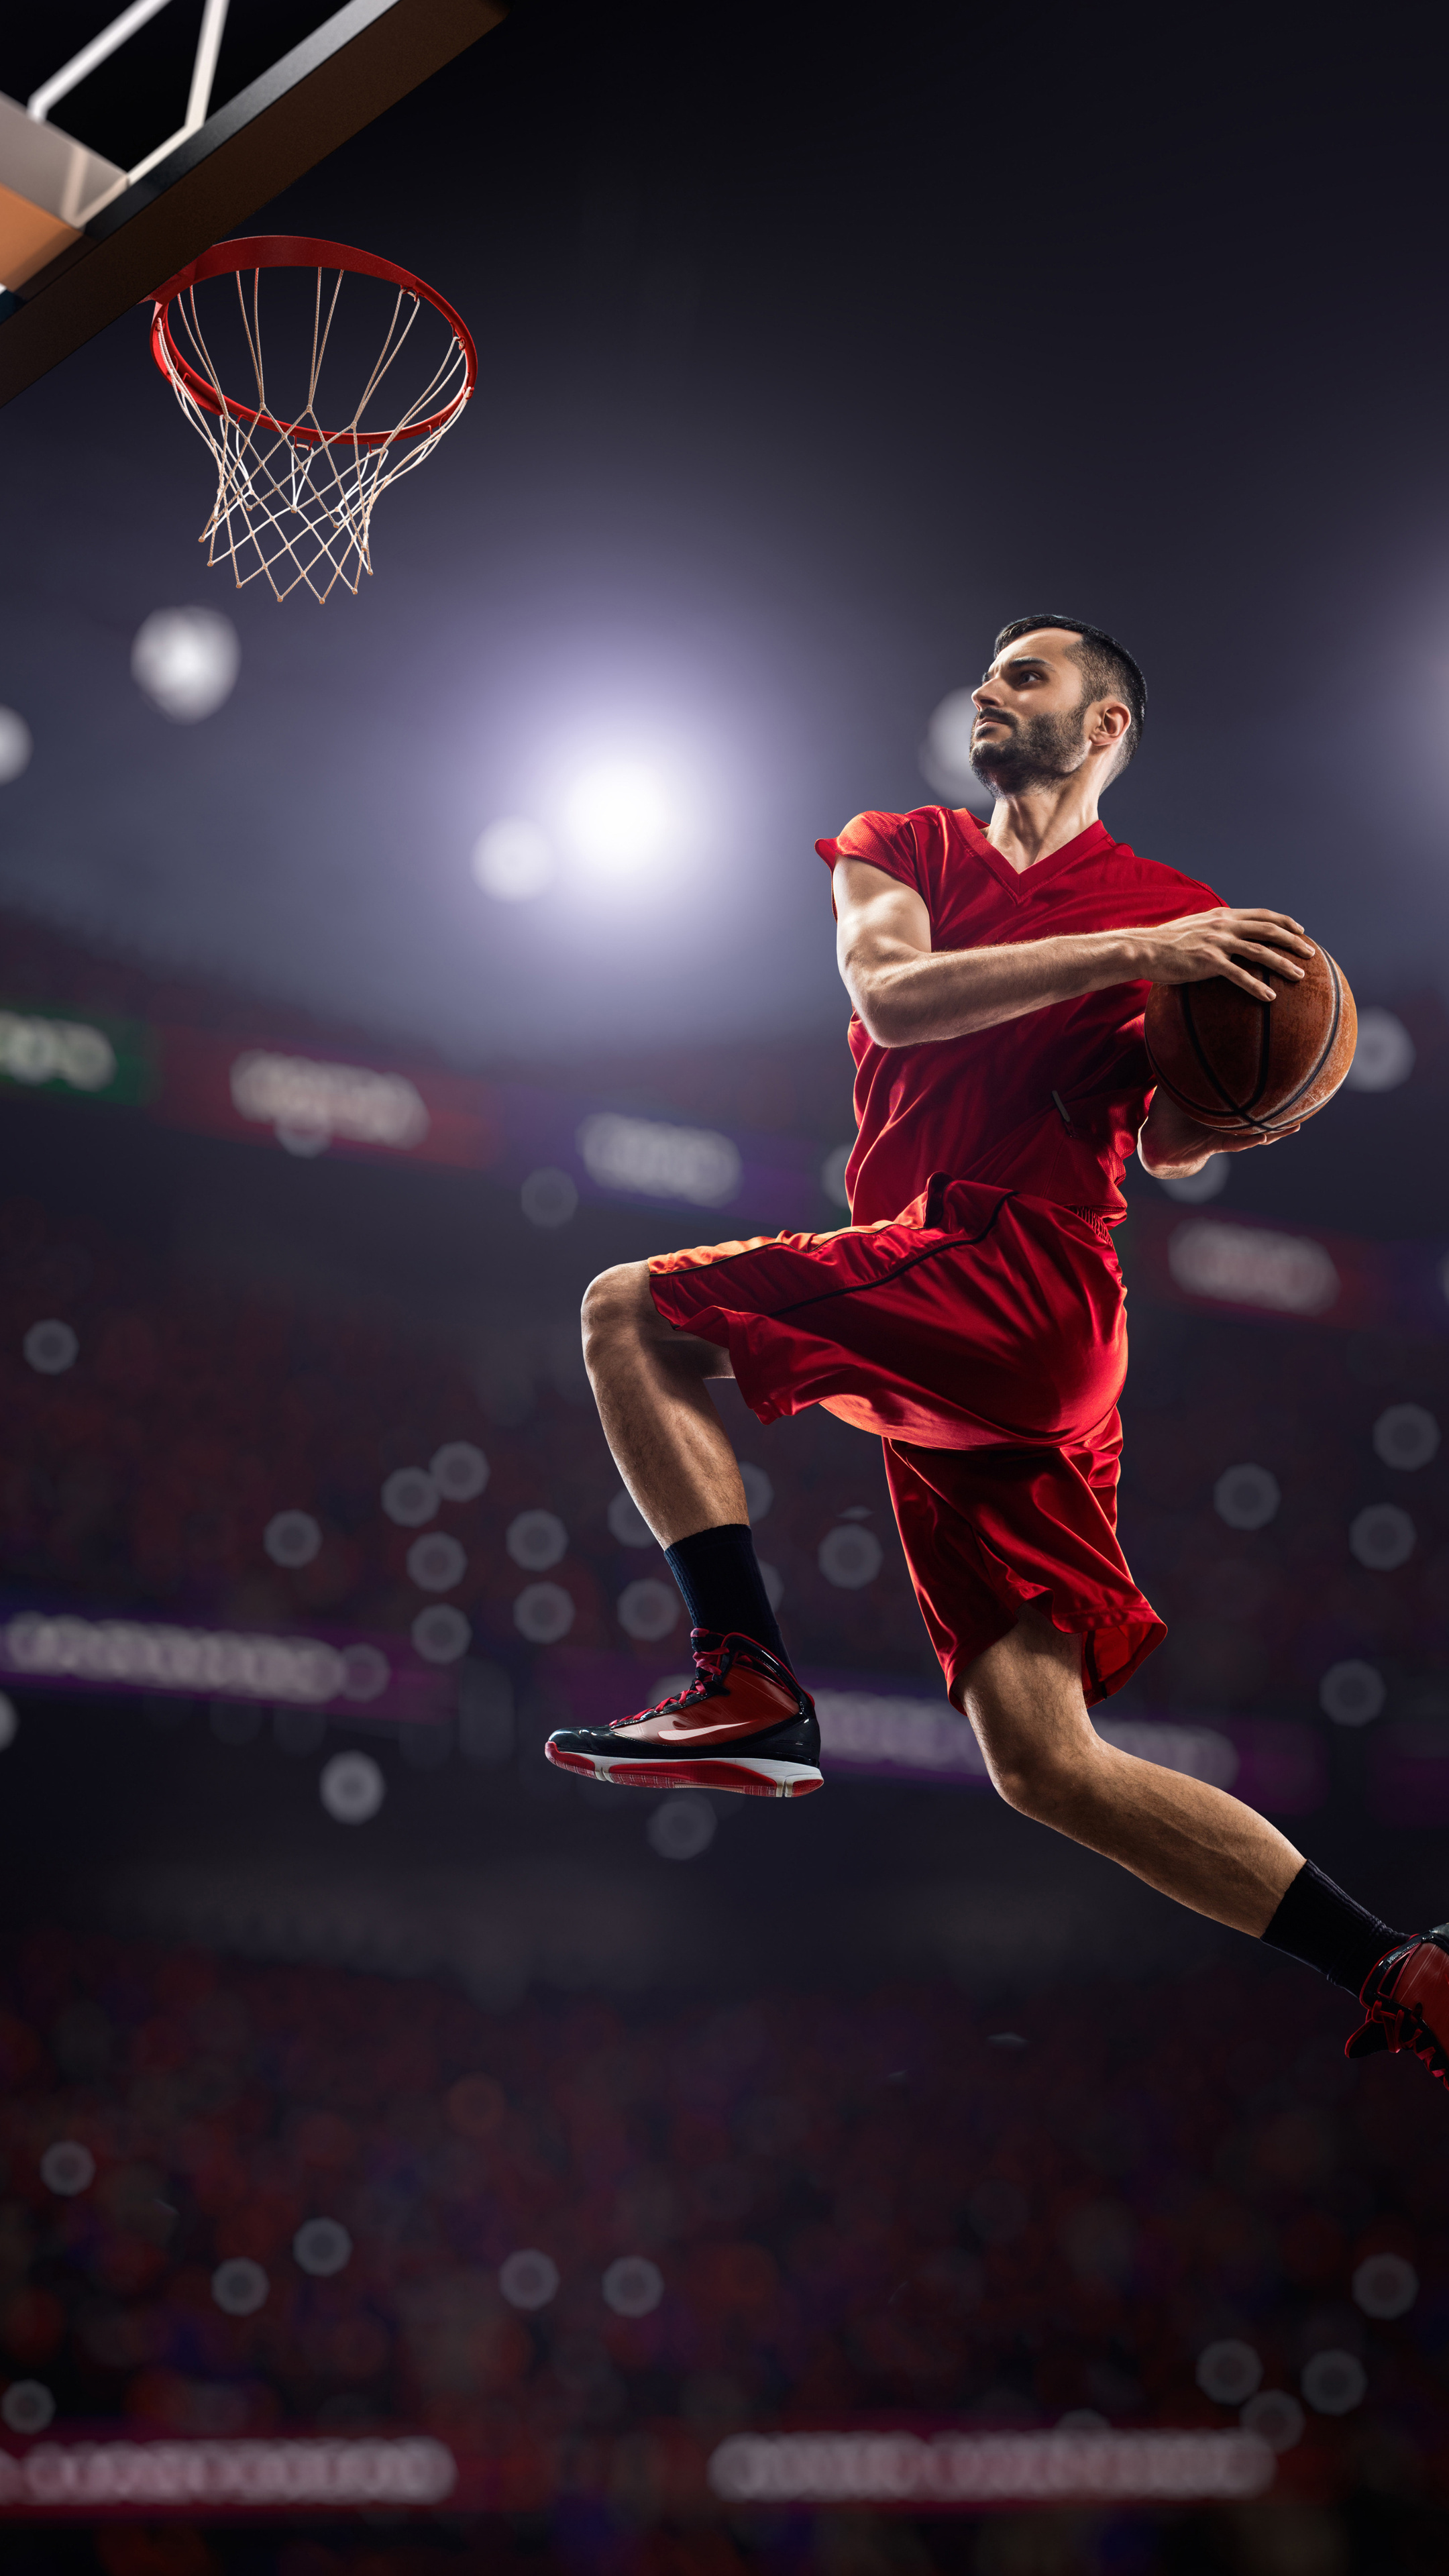 Jumping: Basketball playing, Springing into the air, Levitation, Sports, Basketball player in a hook. 2160x3840 4K Wallpaper.